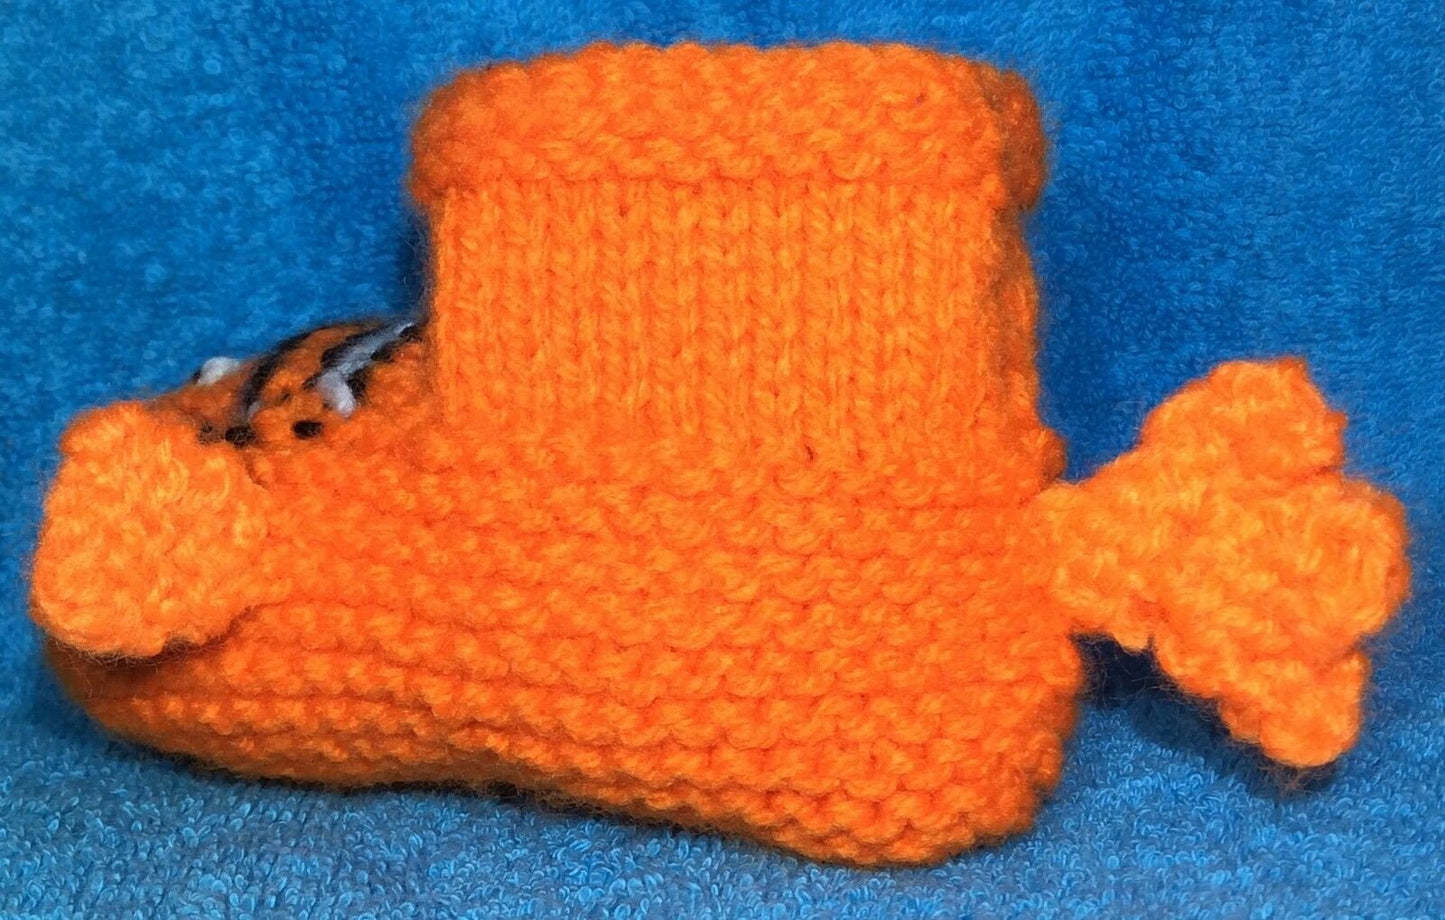 KNITTING PATTERN - Nemo inspired booties fit 0 - 6 month old Baby